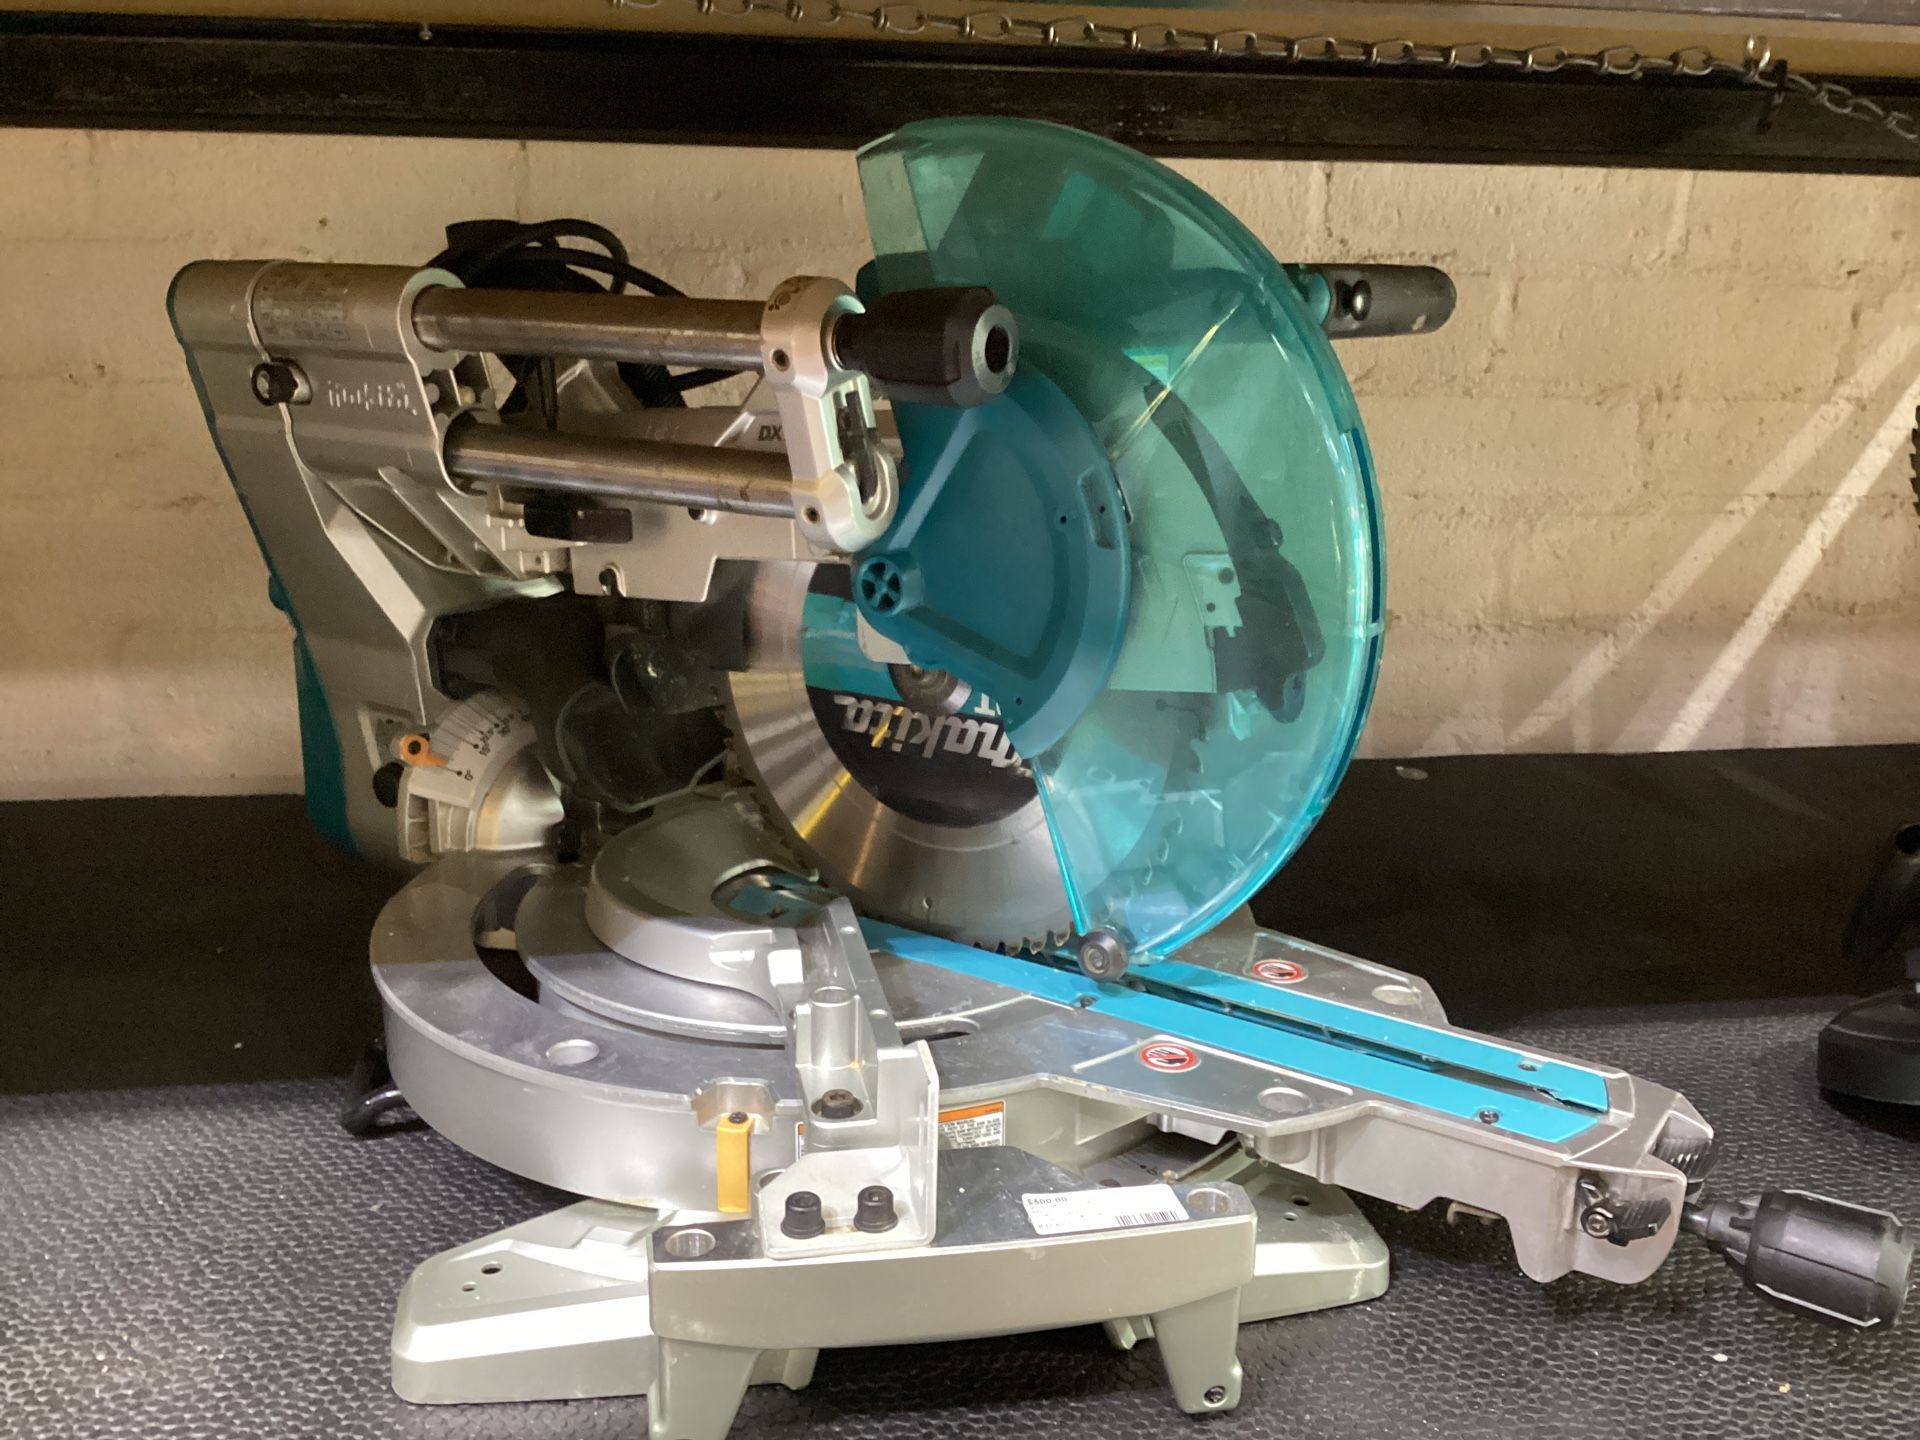 MAKITA MITTER SAW LS1219L 12” BLADE CORDED ELECTRIC (PRICE IS FIRM, I DO NOT ACCEPT OFFERS)